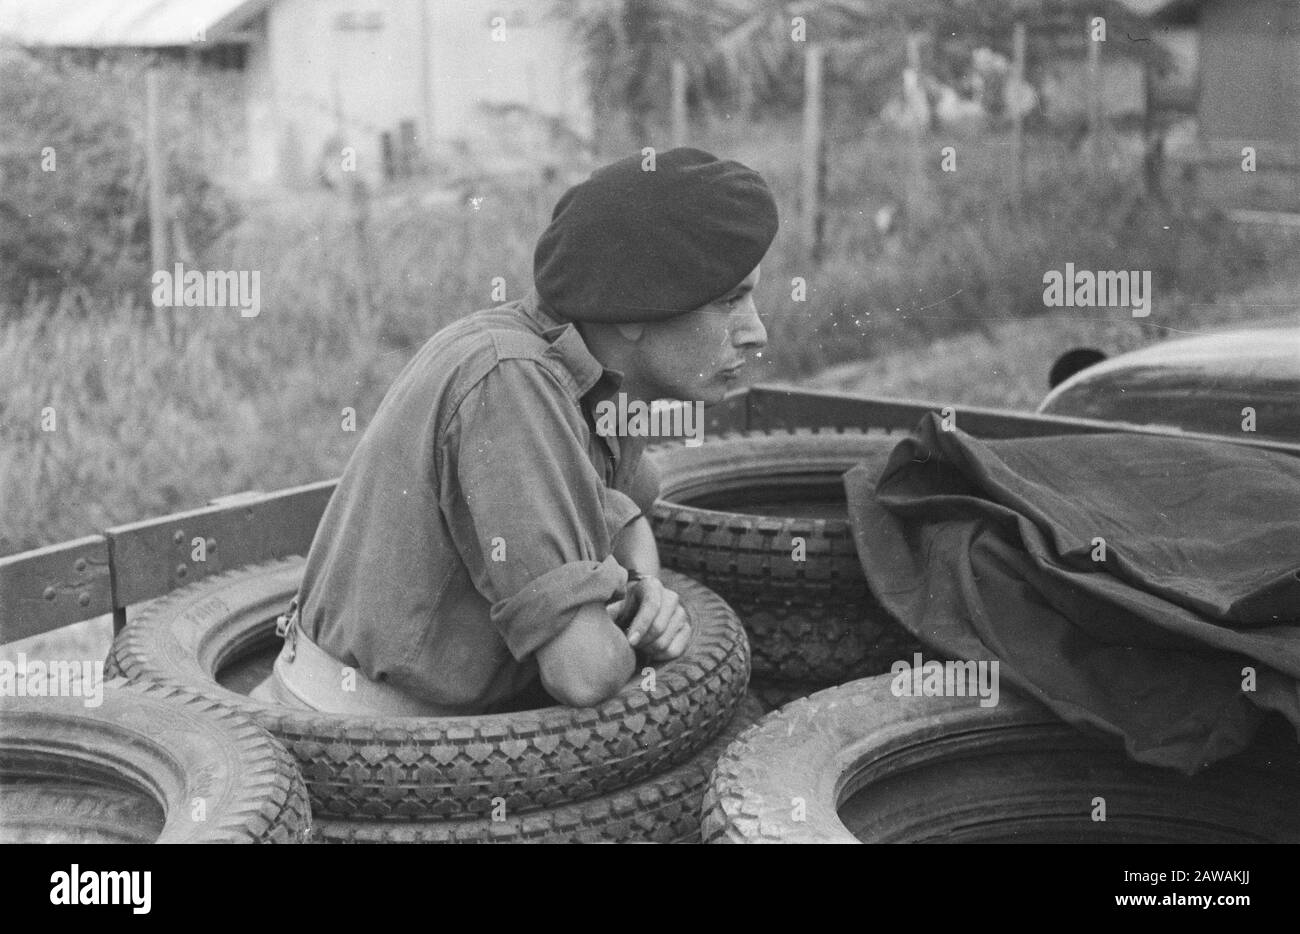 [soldier stands in a pile of tires] Date: October 1964 Location: Indonesia Dutch East Indies Stock Photo